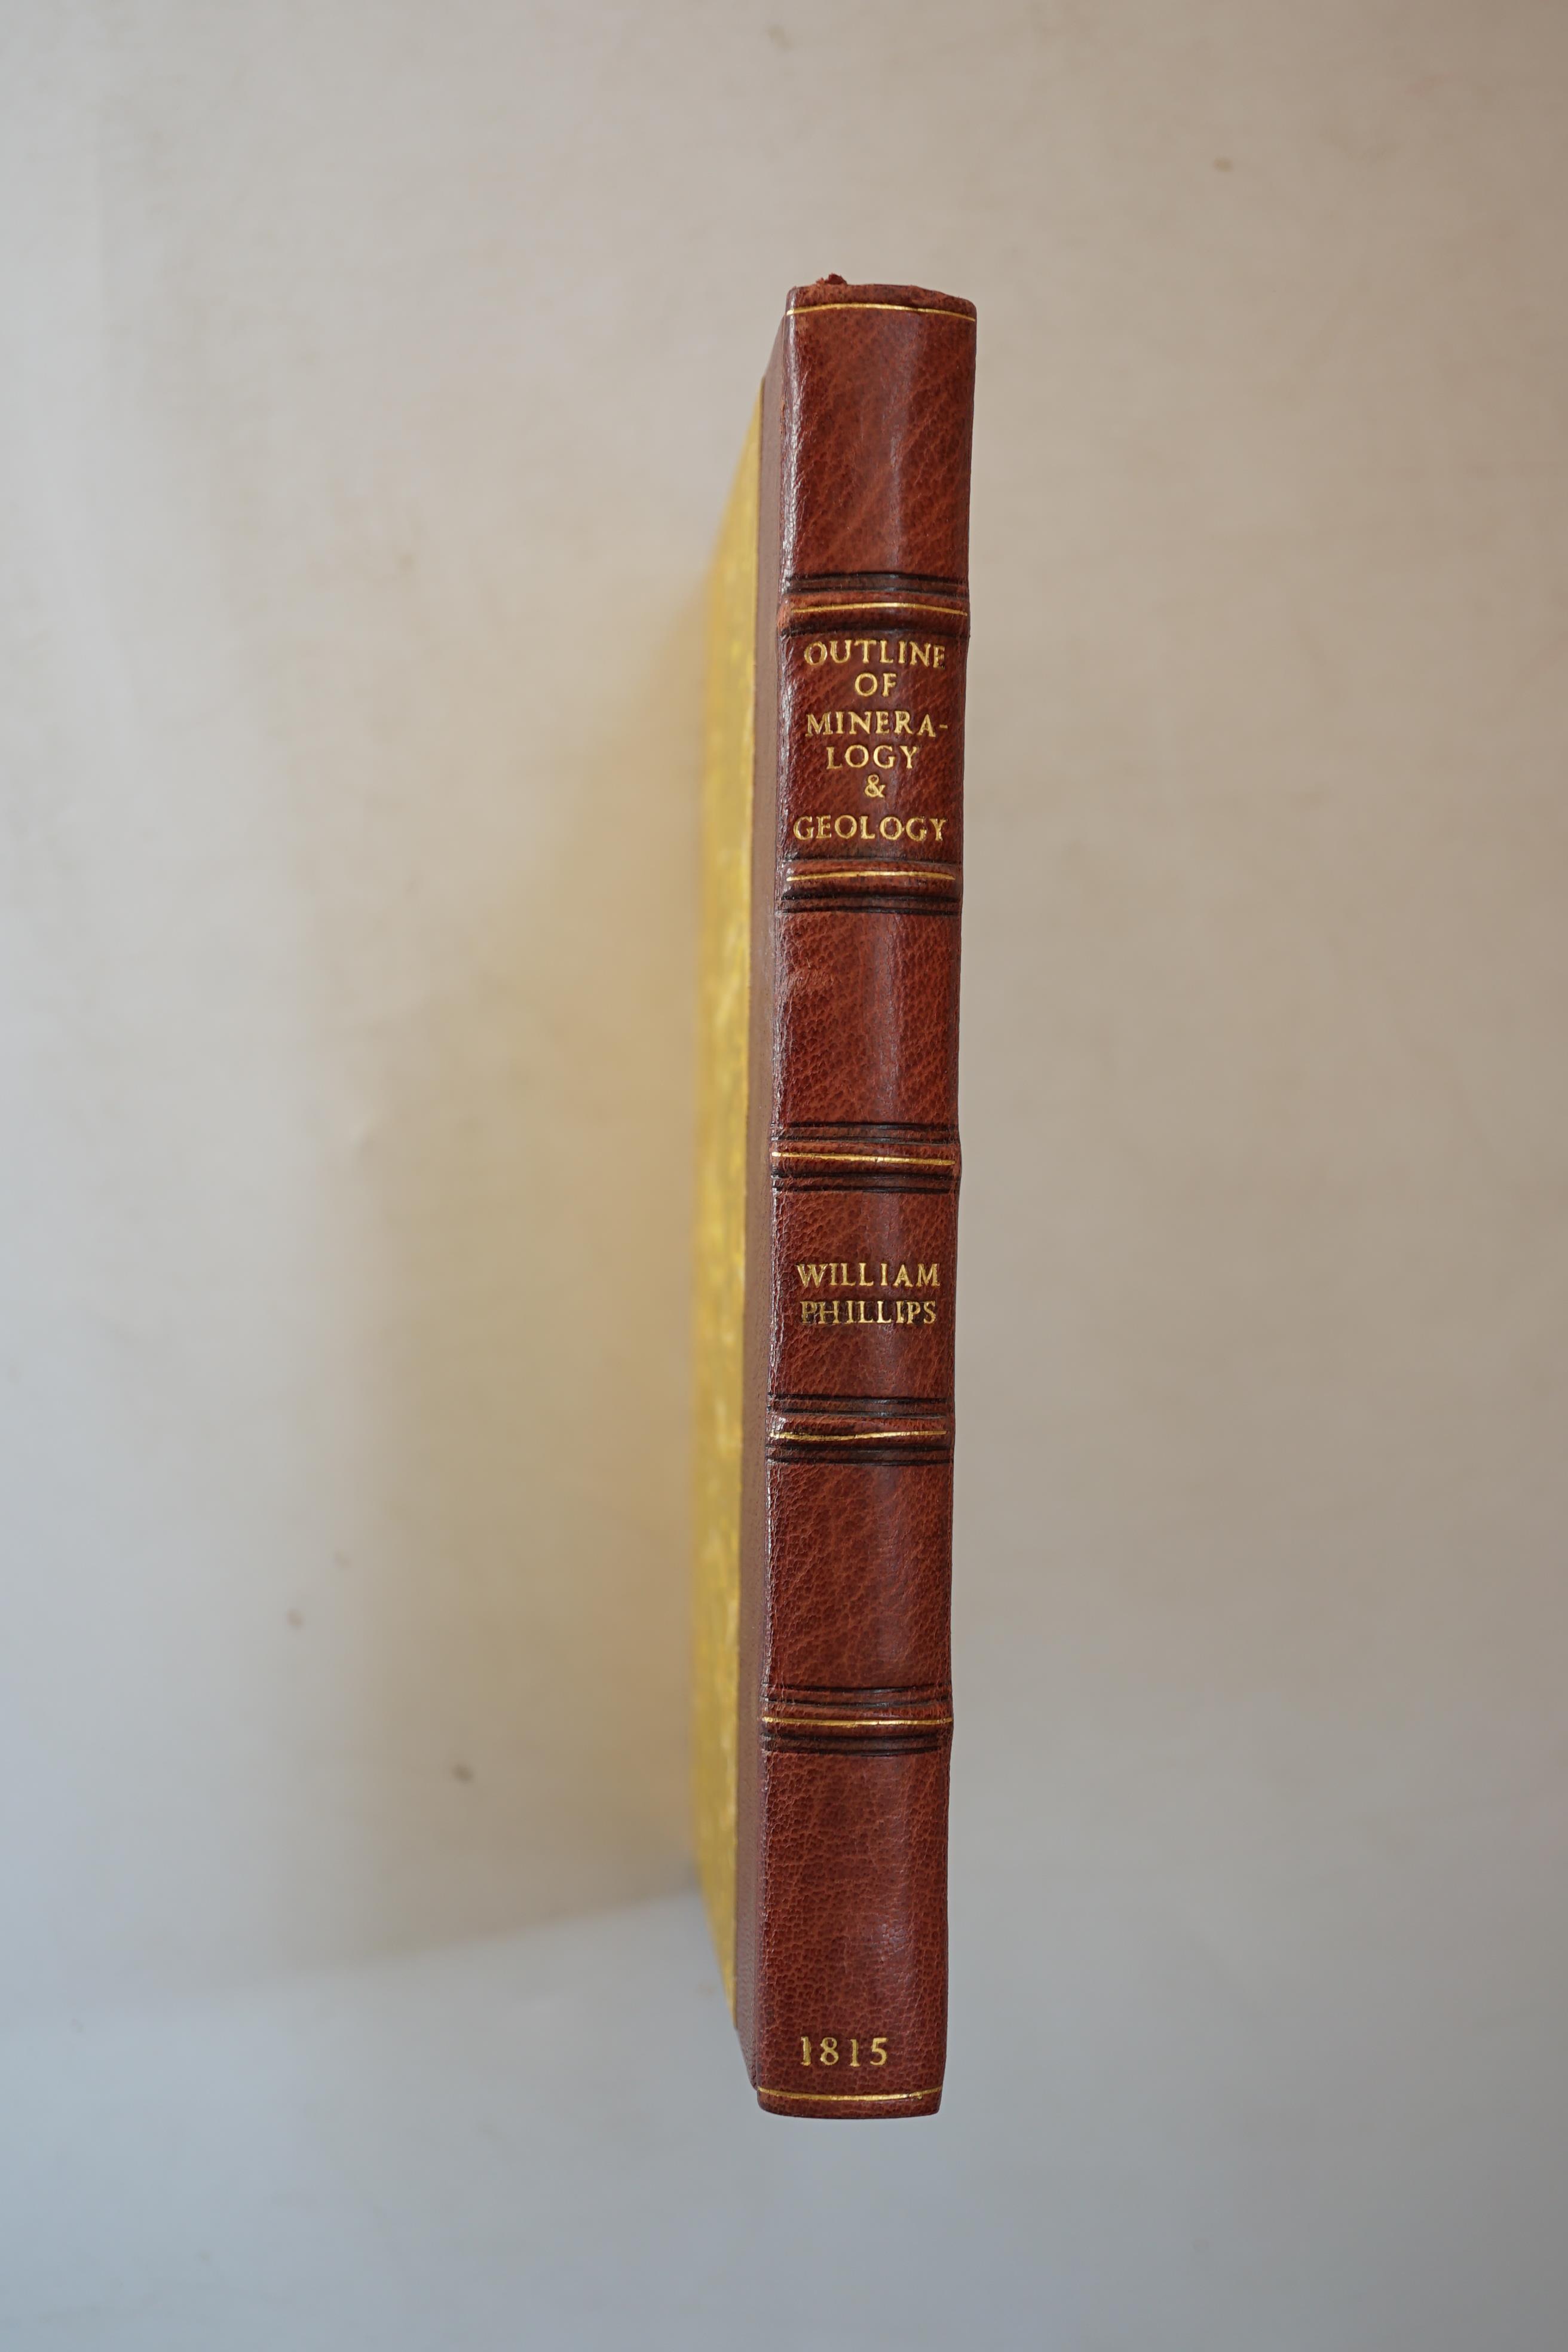 Phillips, William - An Outline of Mineralogy and Geology, 1st edition, authors presentation copy, 4 plates, including 2 hand-coloured, 8vo, rebound quarter morocco, spine gilt in compartments, rubbed, 8vo, London, 1815.